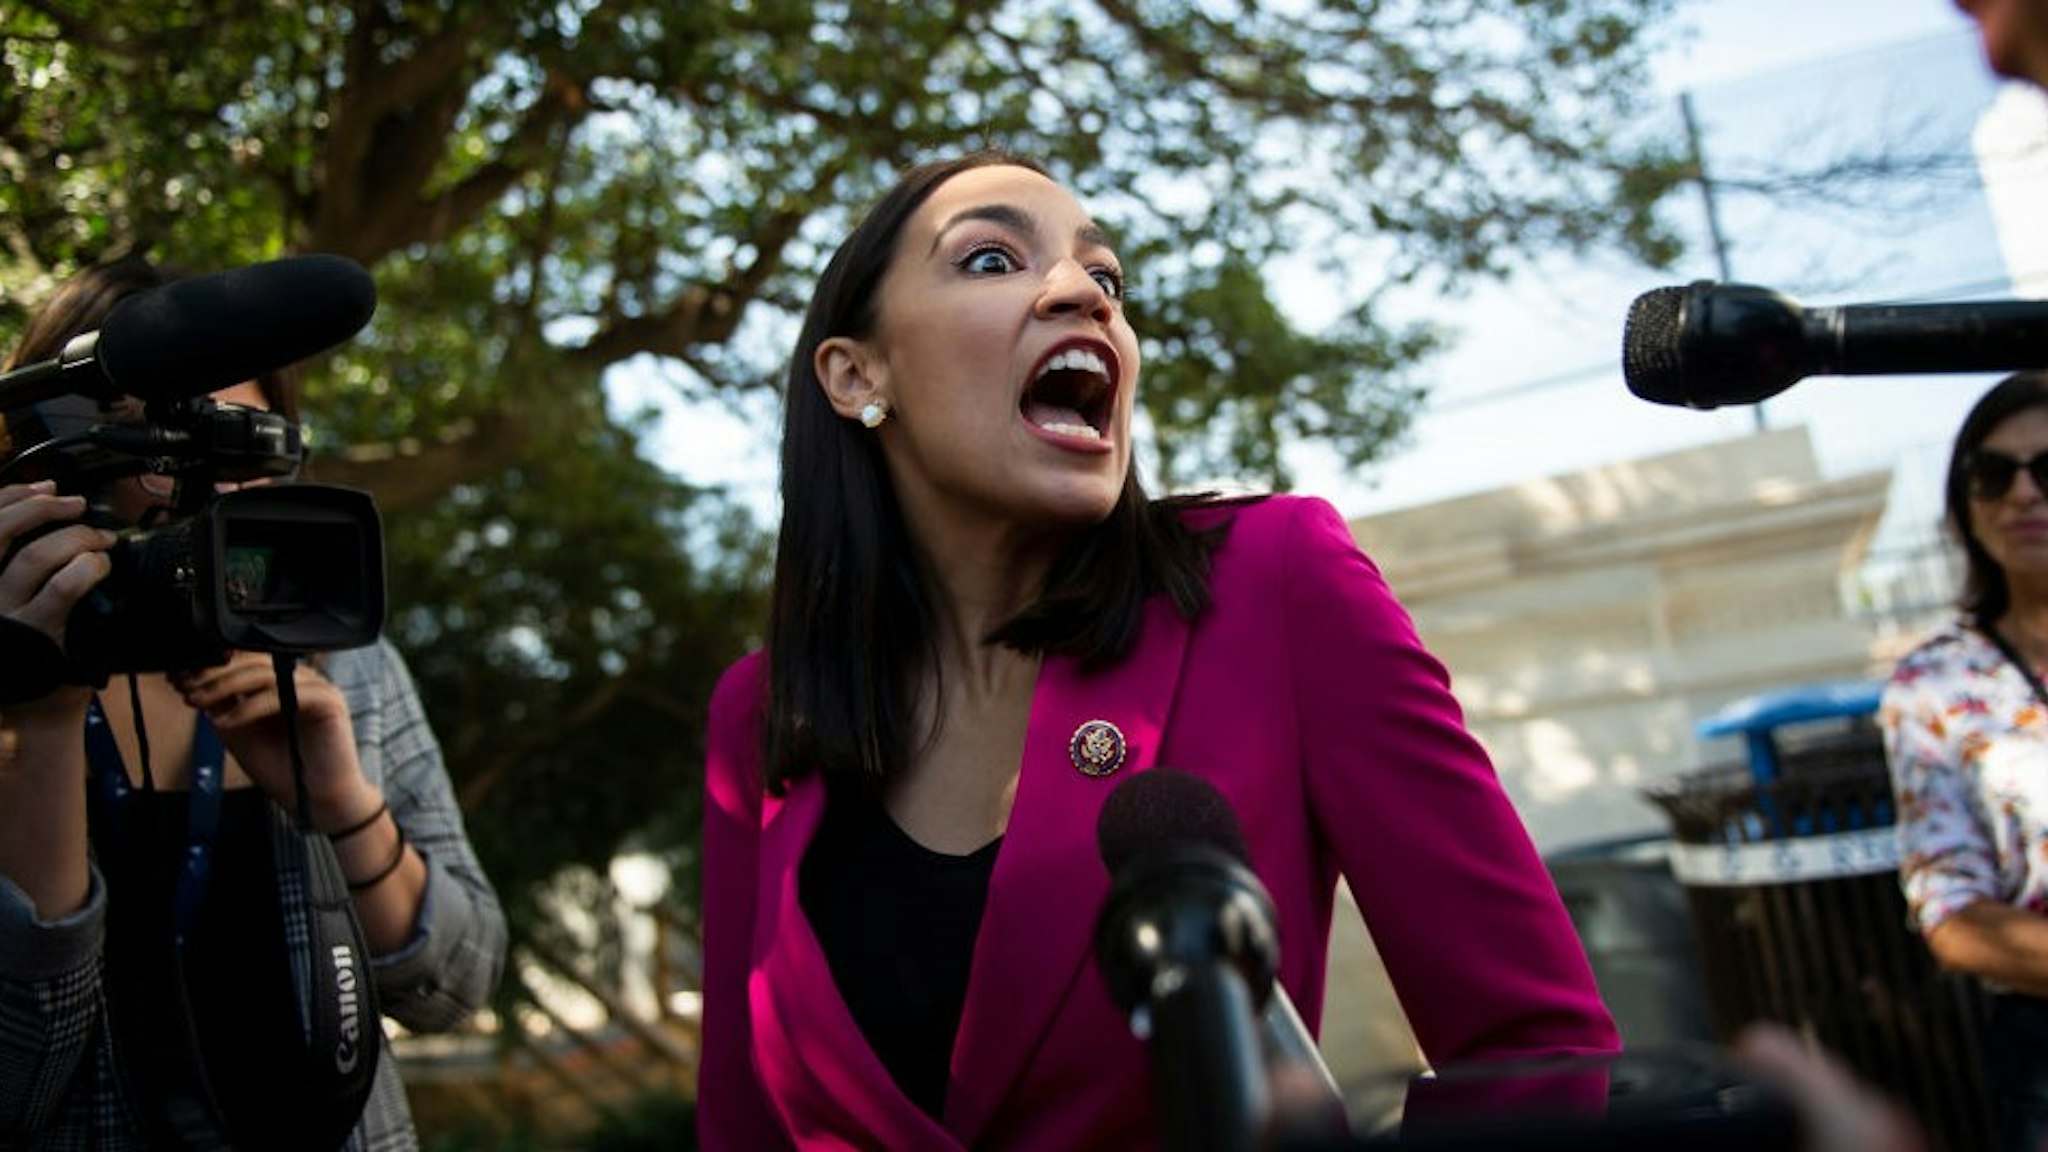 Rep. Alexandria Ocasio-Cortez, D-N.Y., stops to speak with reporters outside of the Capitol after the final votes of the week on Friday, Sept. 27, 2019. (Photo by Caroline Brehman/CQ-Roll Call, Inc via Getty Images)